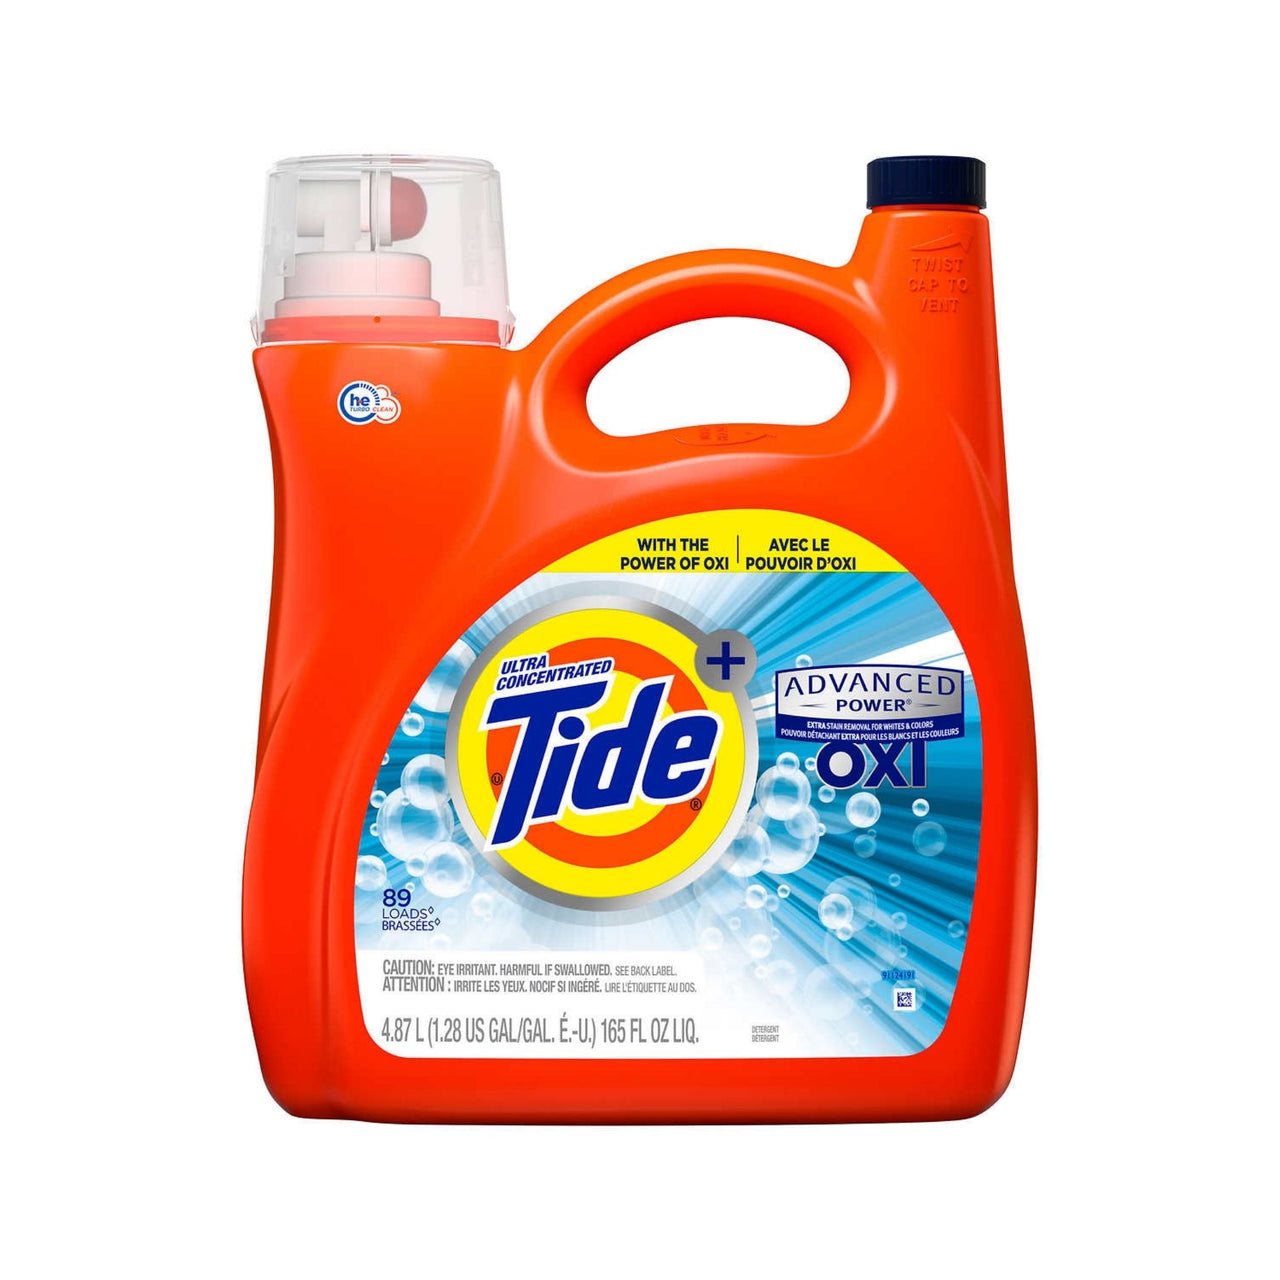 Image of Tide Advanced Power Ultra Concentrated Liquid Laundry Detergent with Oxi - 1 x 5.471445 Kilos